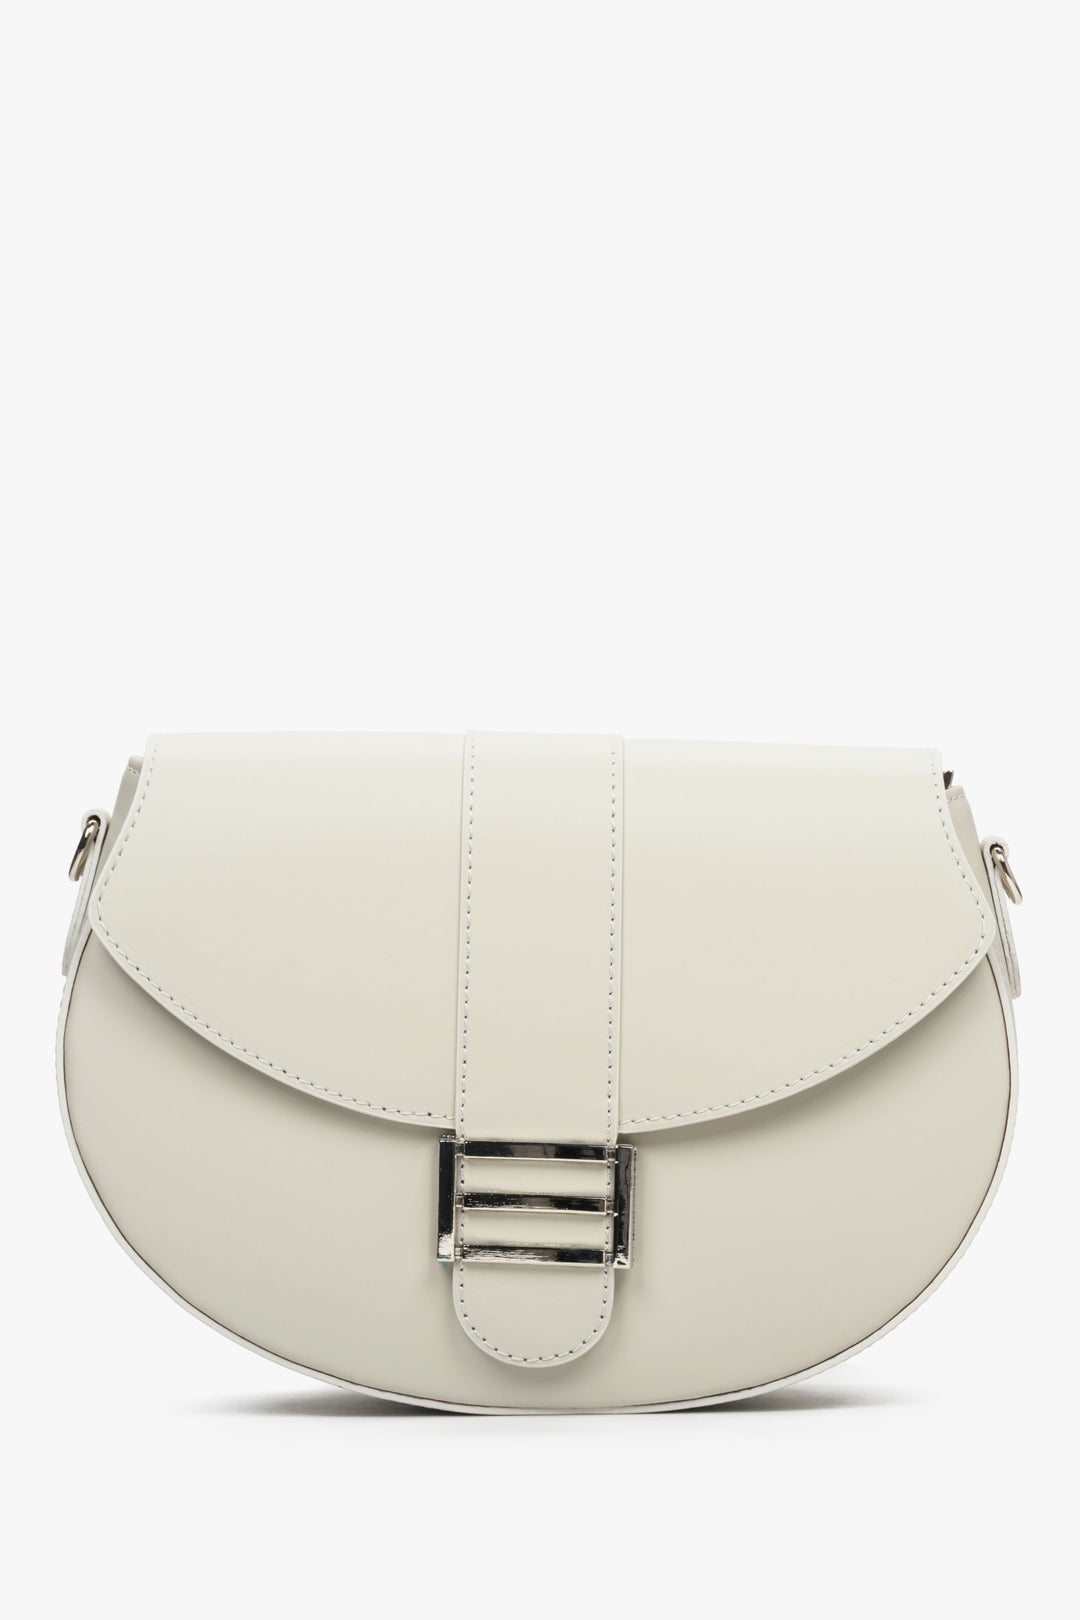 Medium-sized women's light beige leather handbag with a silver clasp.